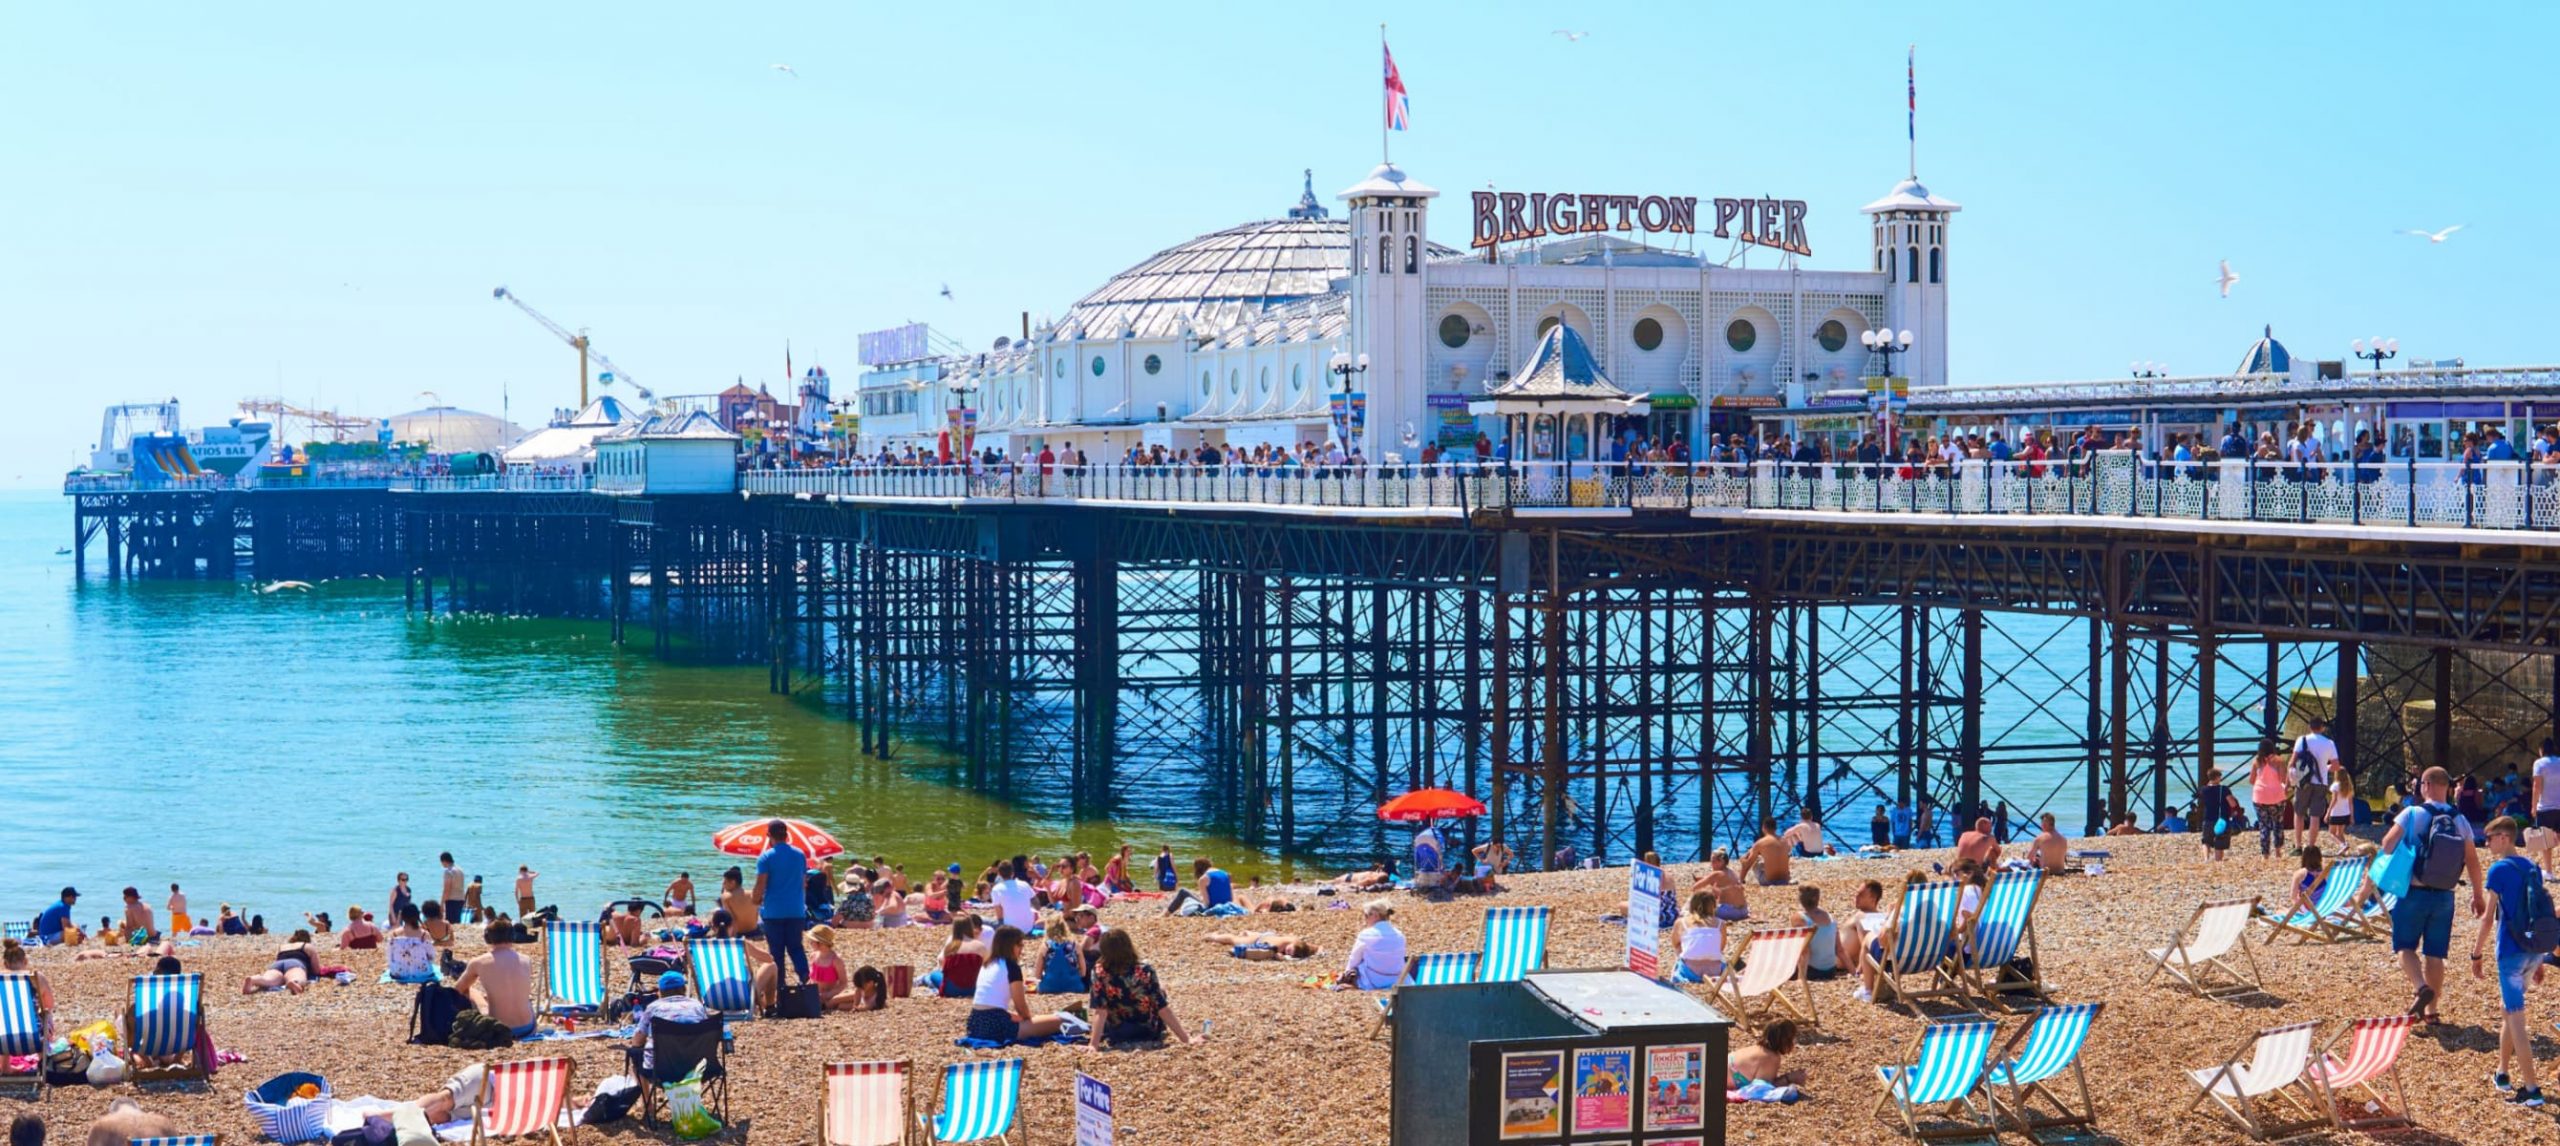 6 Best Things To Do In Brighton, England